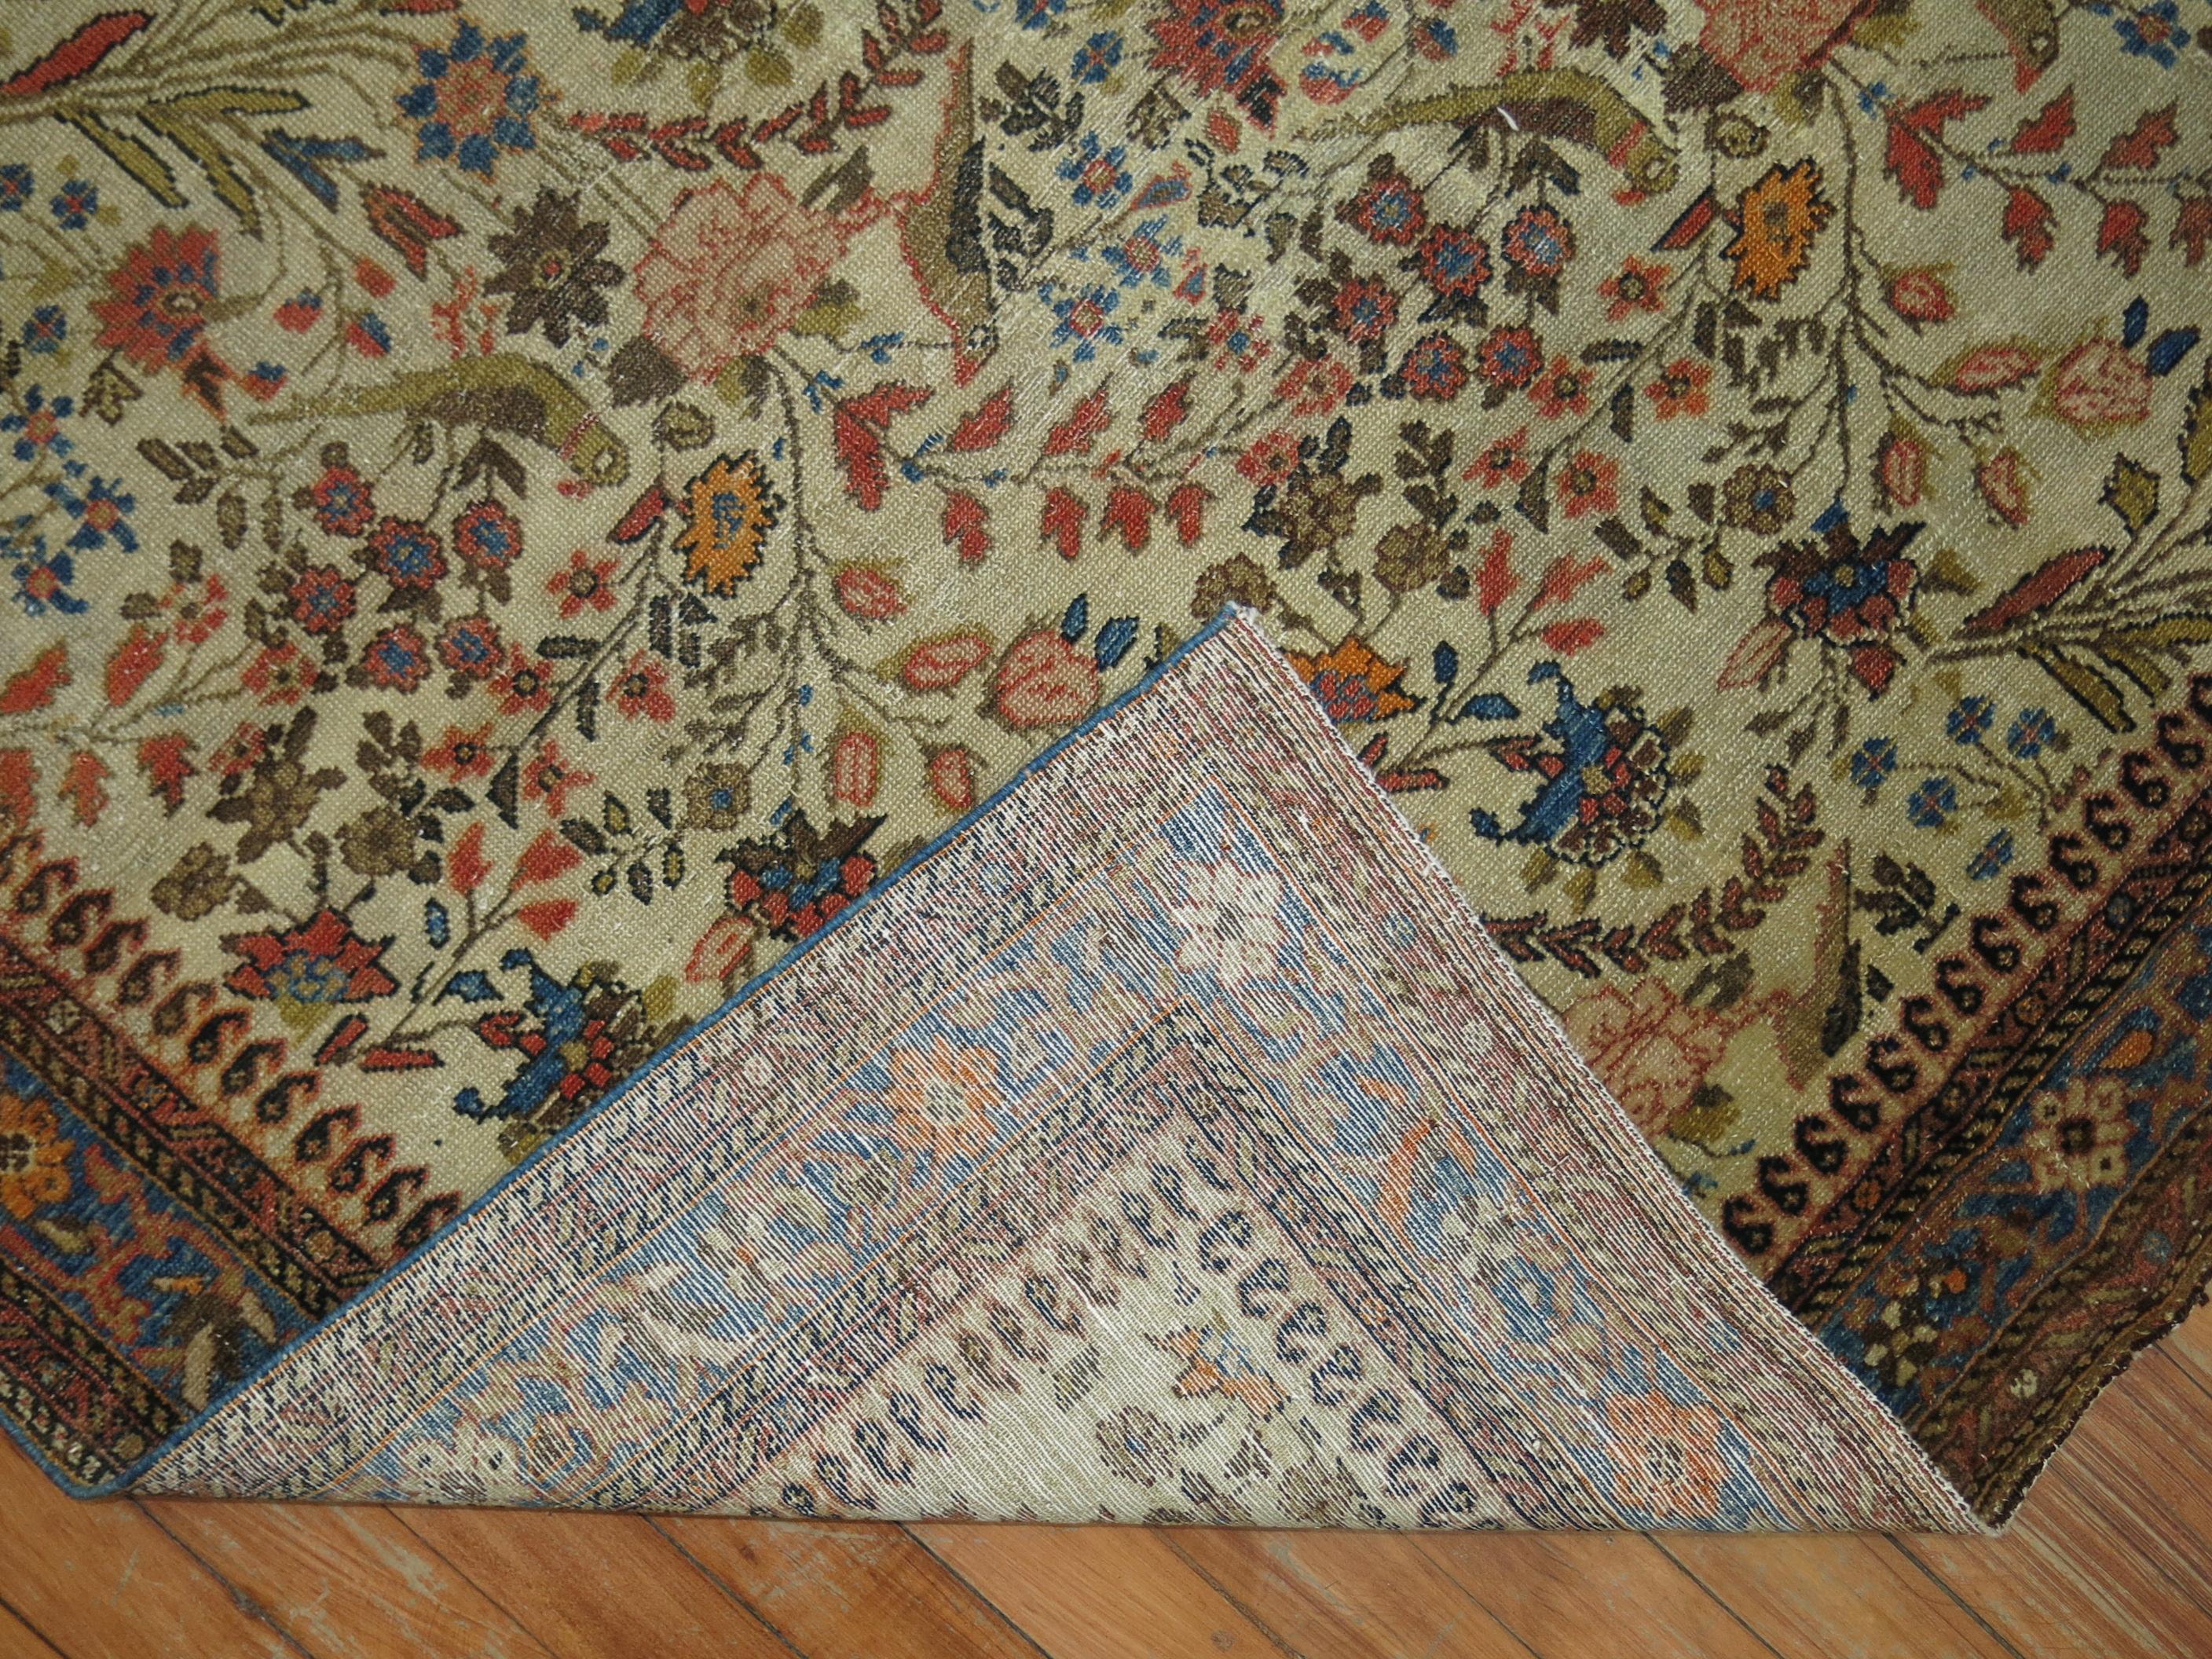 One-of-a-kind early-20th century decorative Northwest Persian pictorial rug.

3'7'' x 3'11''